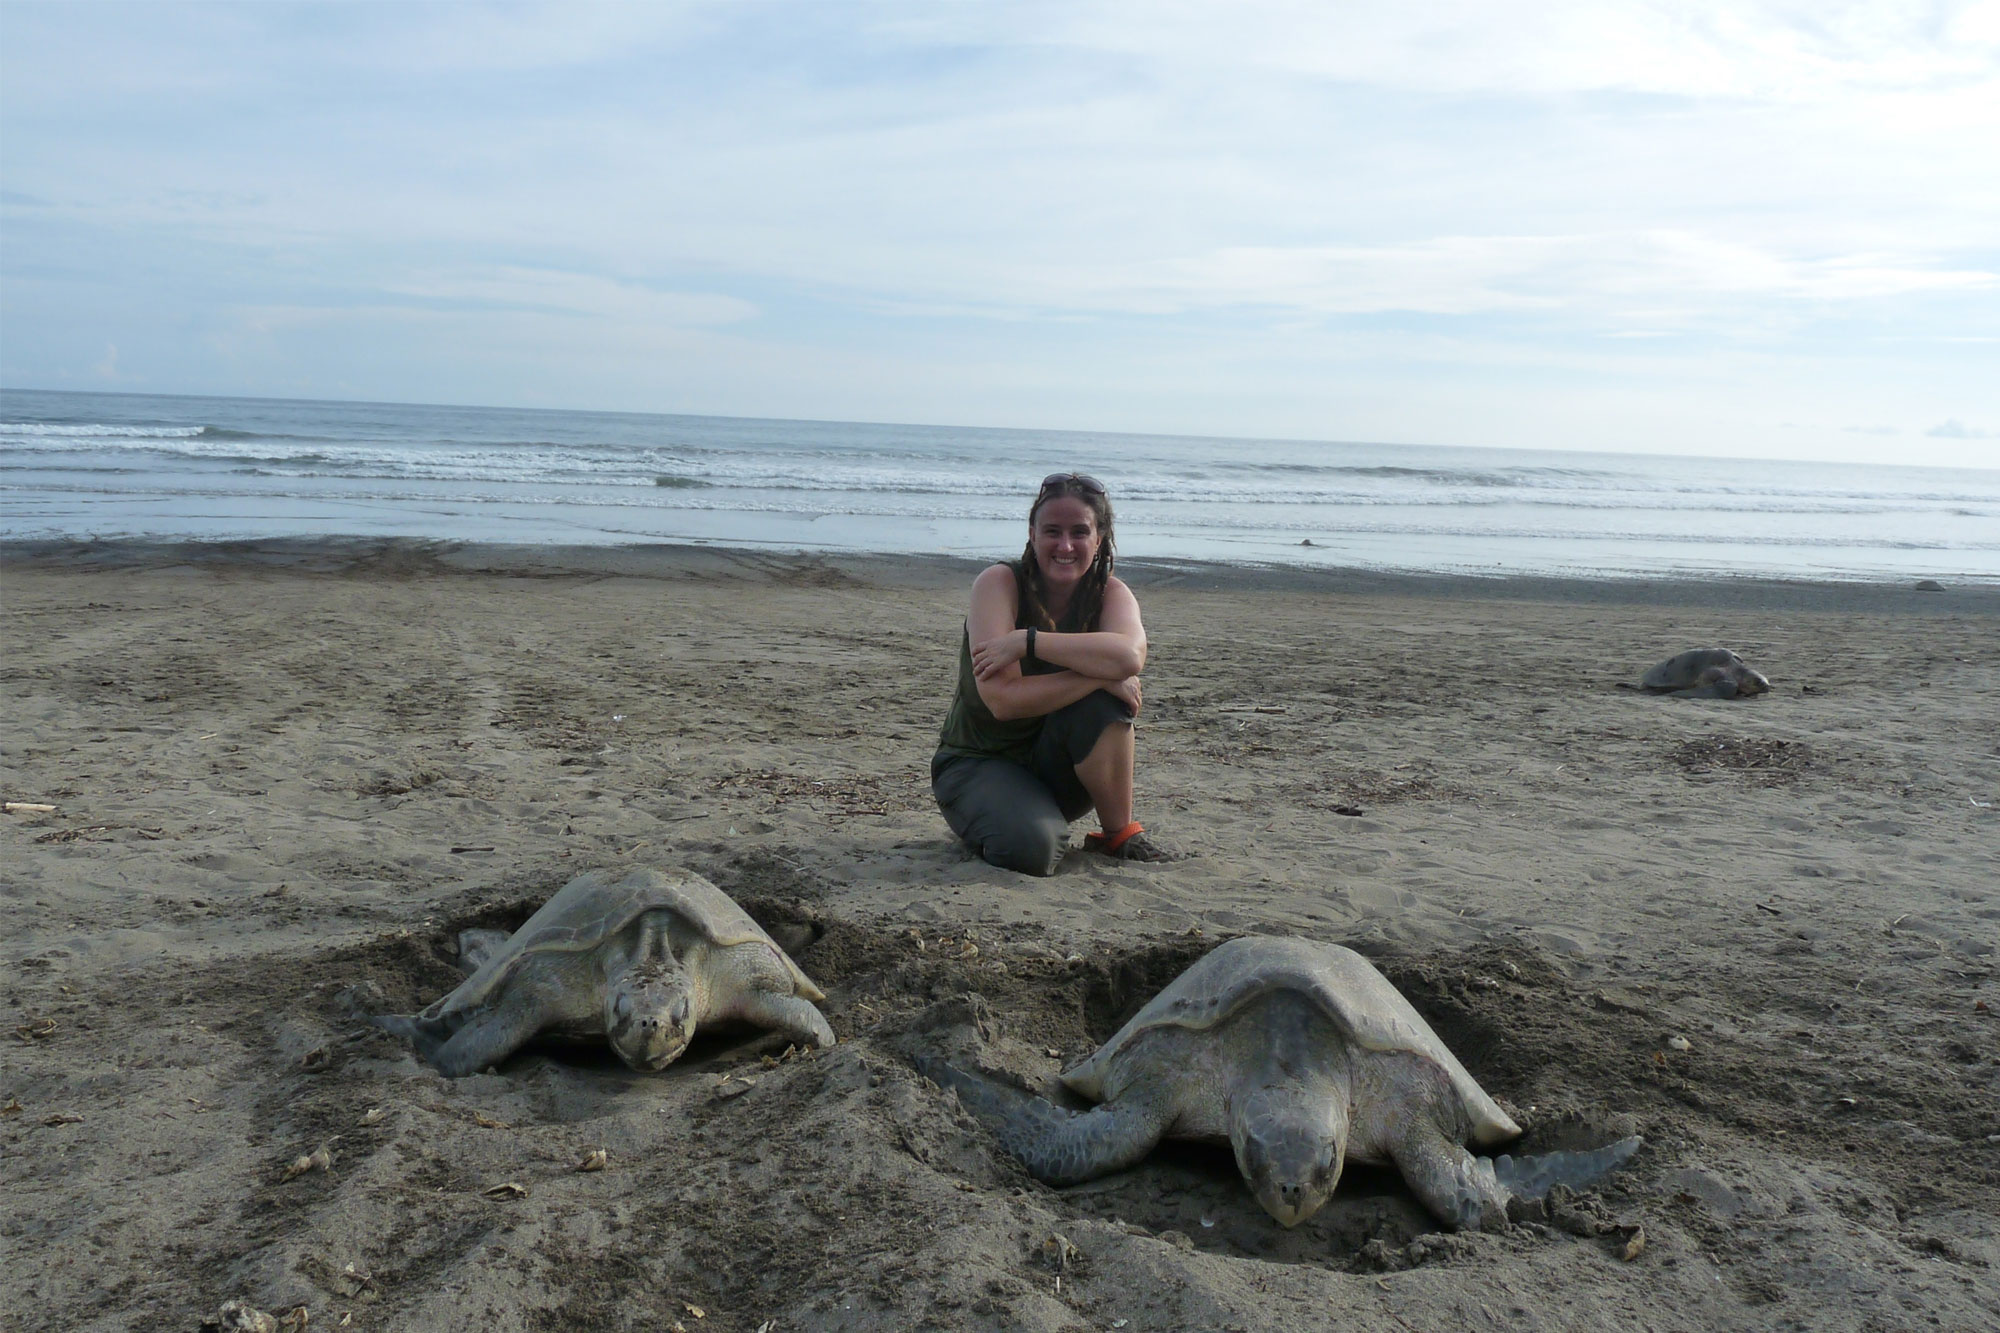 Helen Pheasey with turtles in Costa Rica